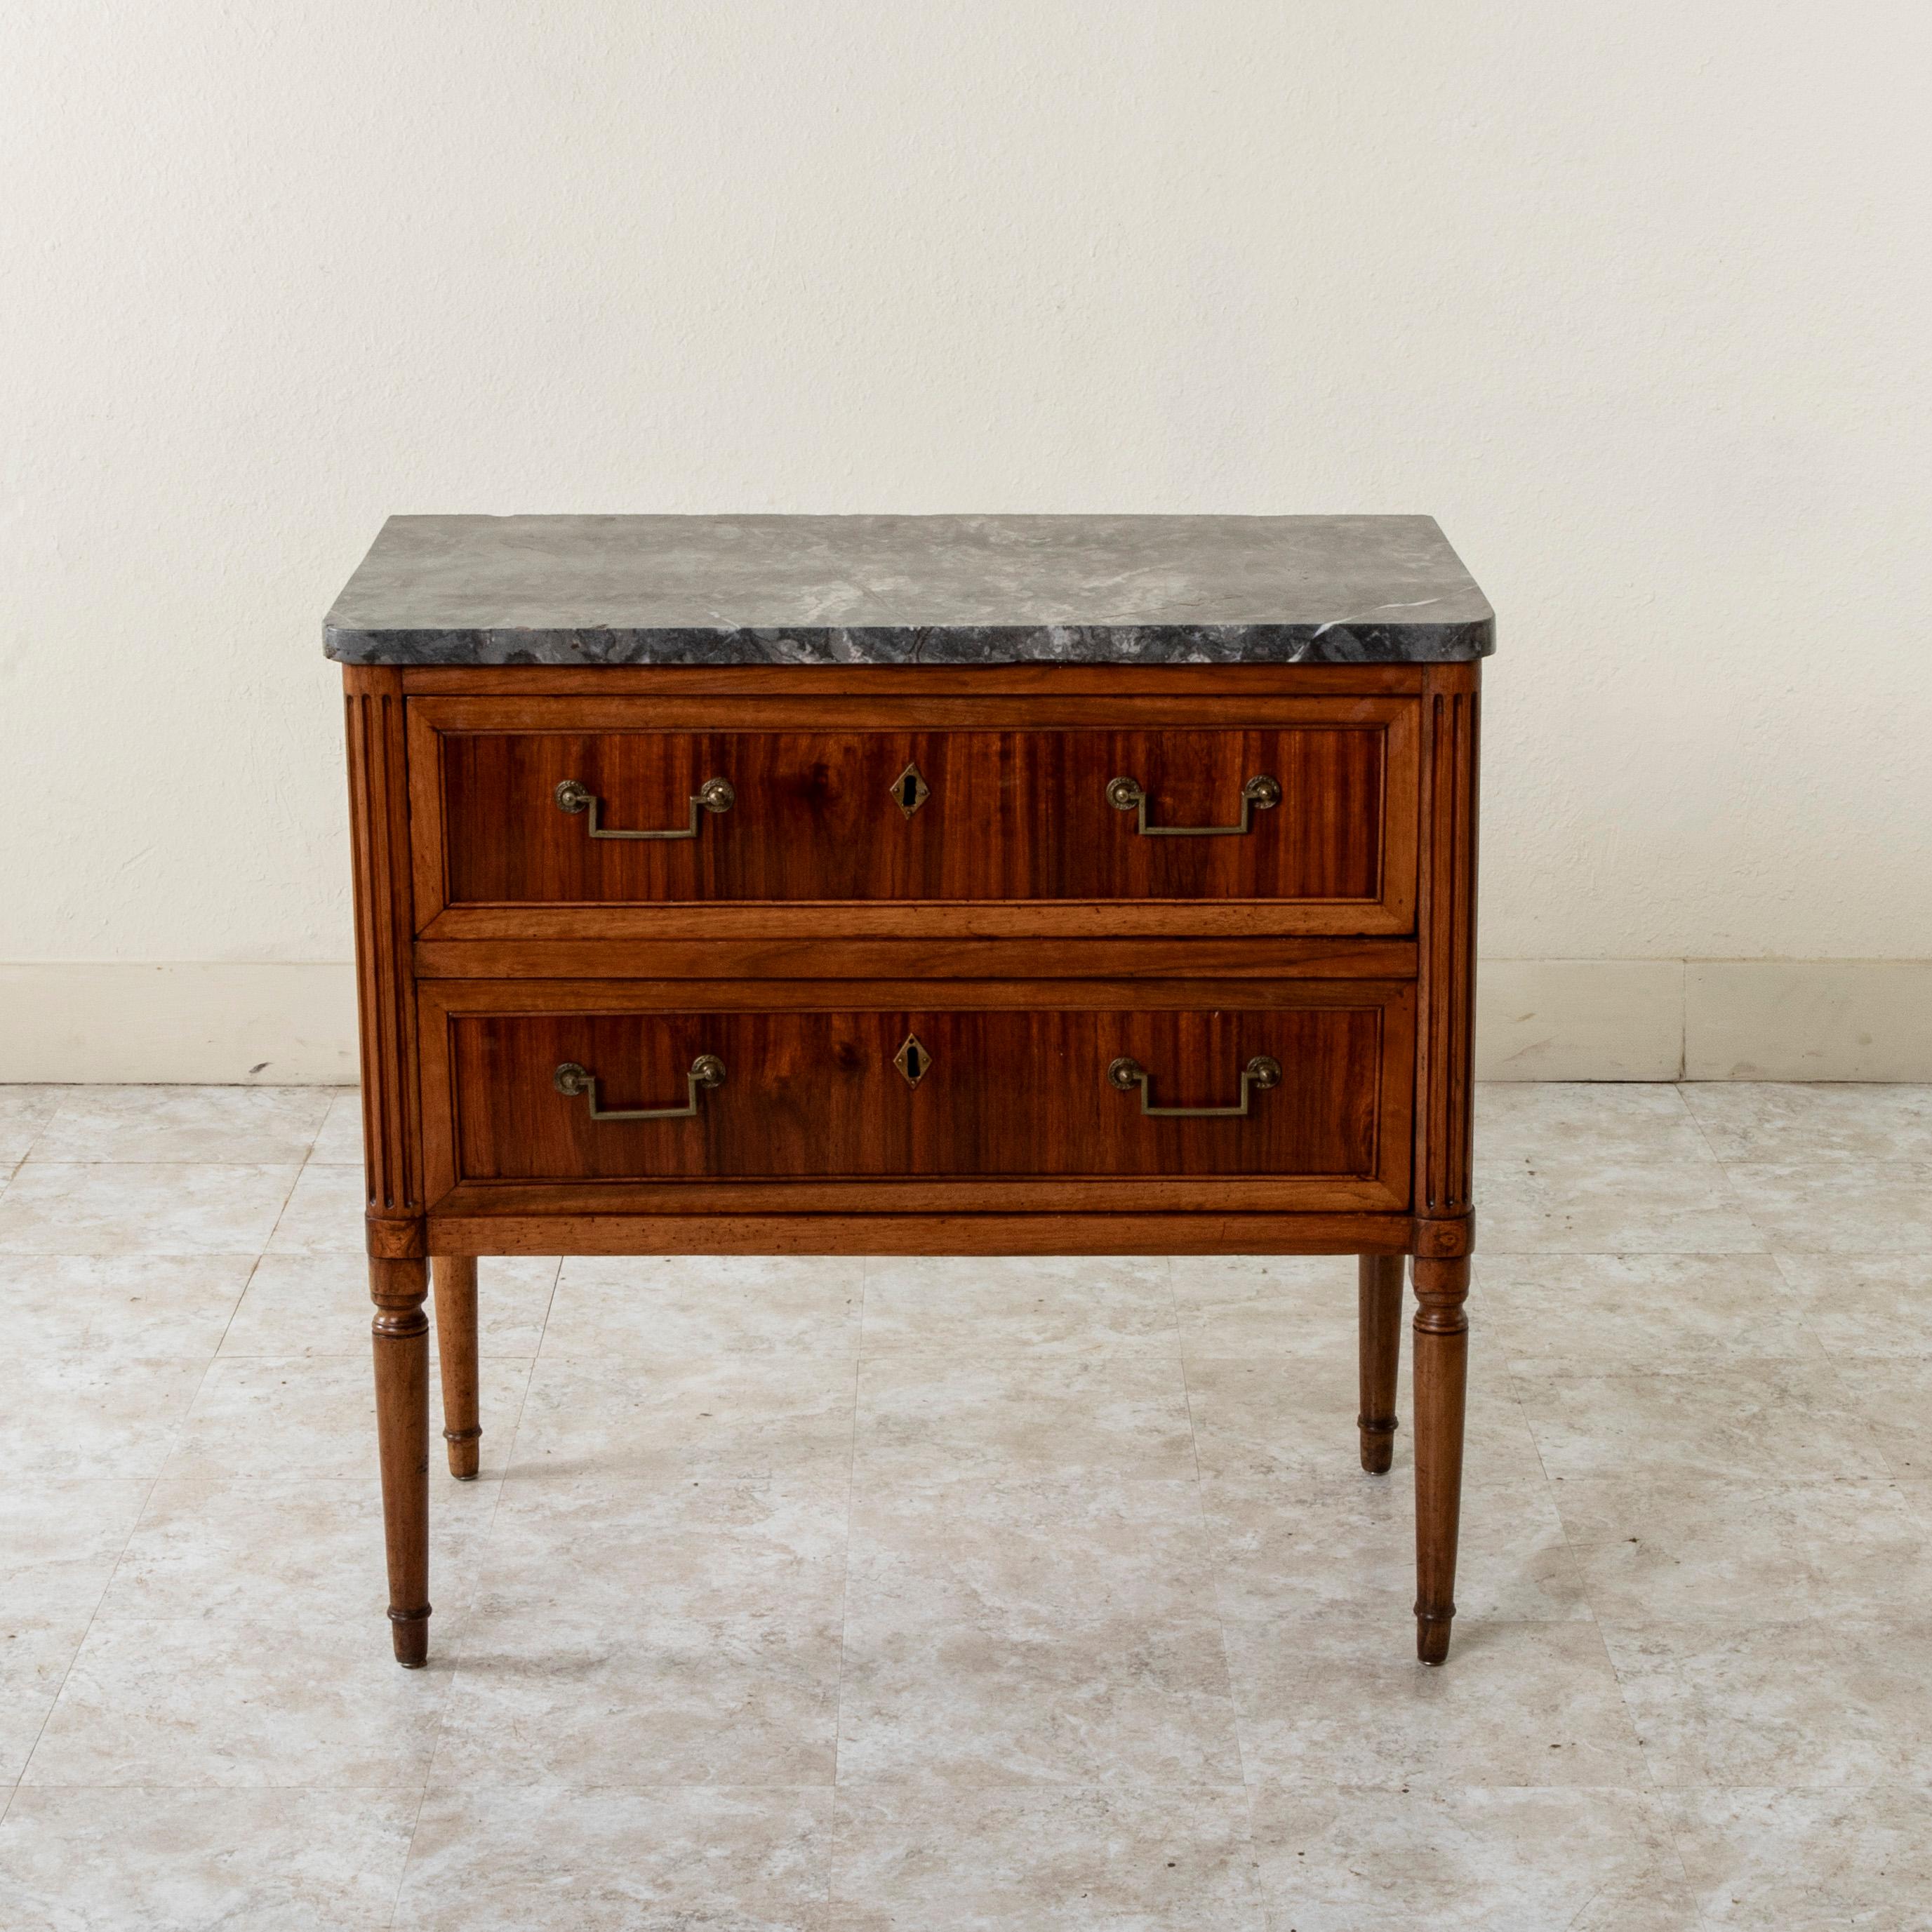 Measuring only 34.5 inches wide, this small scale late eighteenth century French Louis XVI period walnut commode or chest of drawers features a grey marble top and fluted rounded corners. Its two drawers of dovetail construction are detailed with